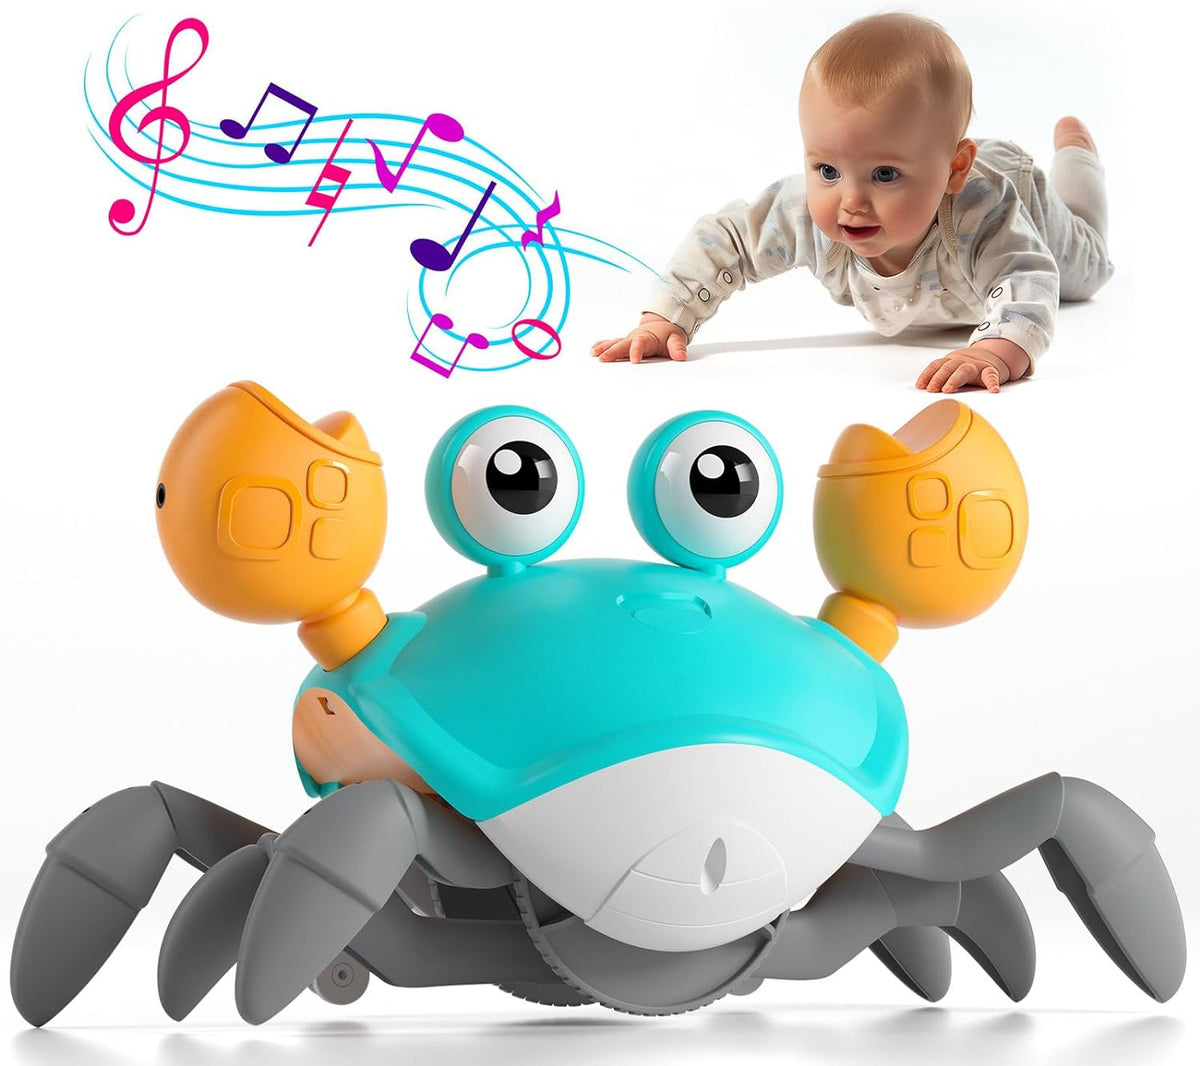 Crawling Crab Baby Toy - Infant Tummy Time Crab Crab Toys for Babies Boy Learning Crawl